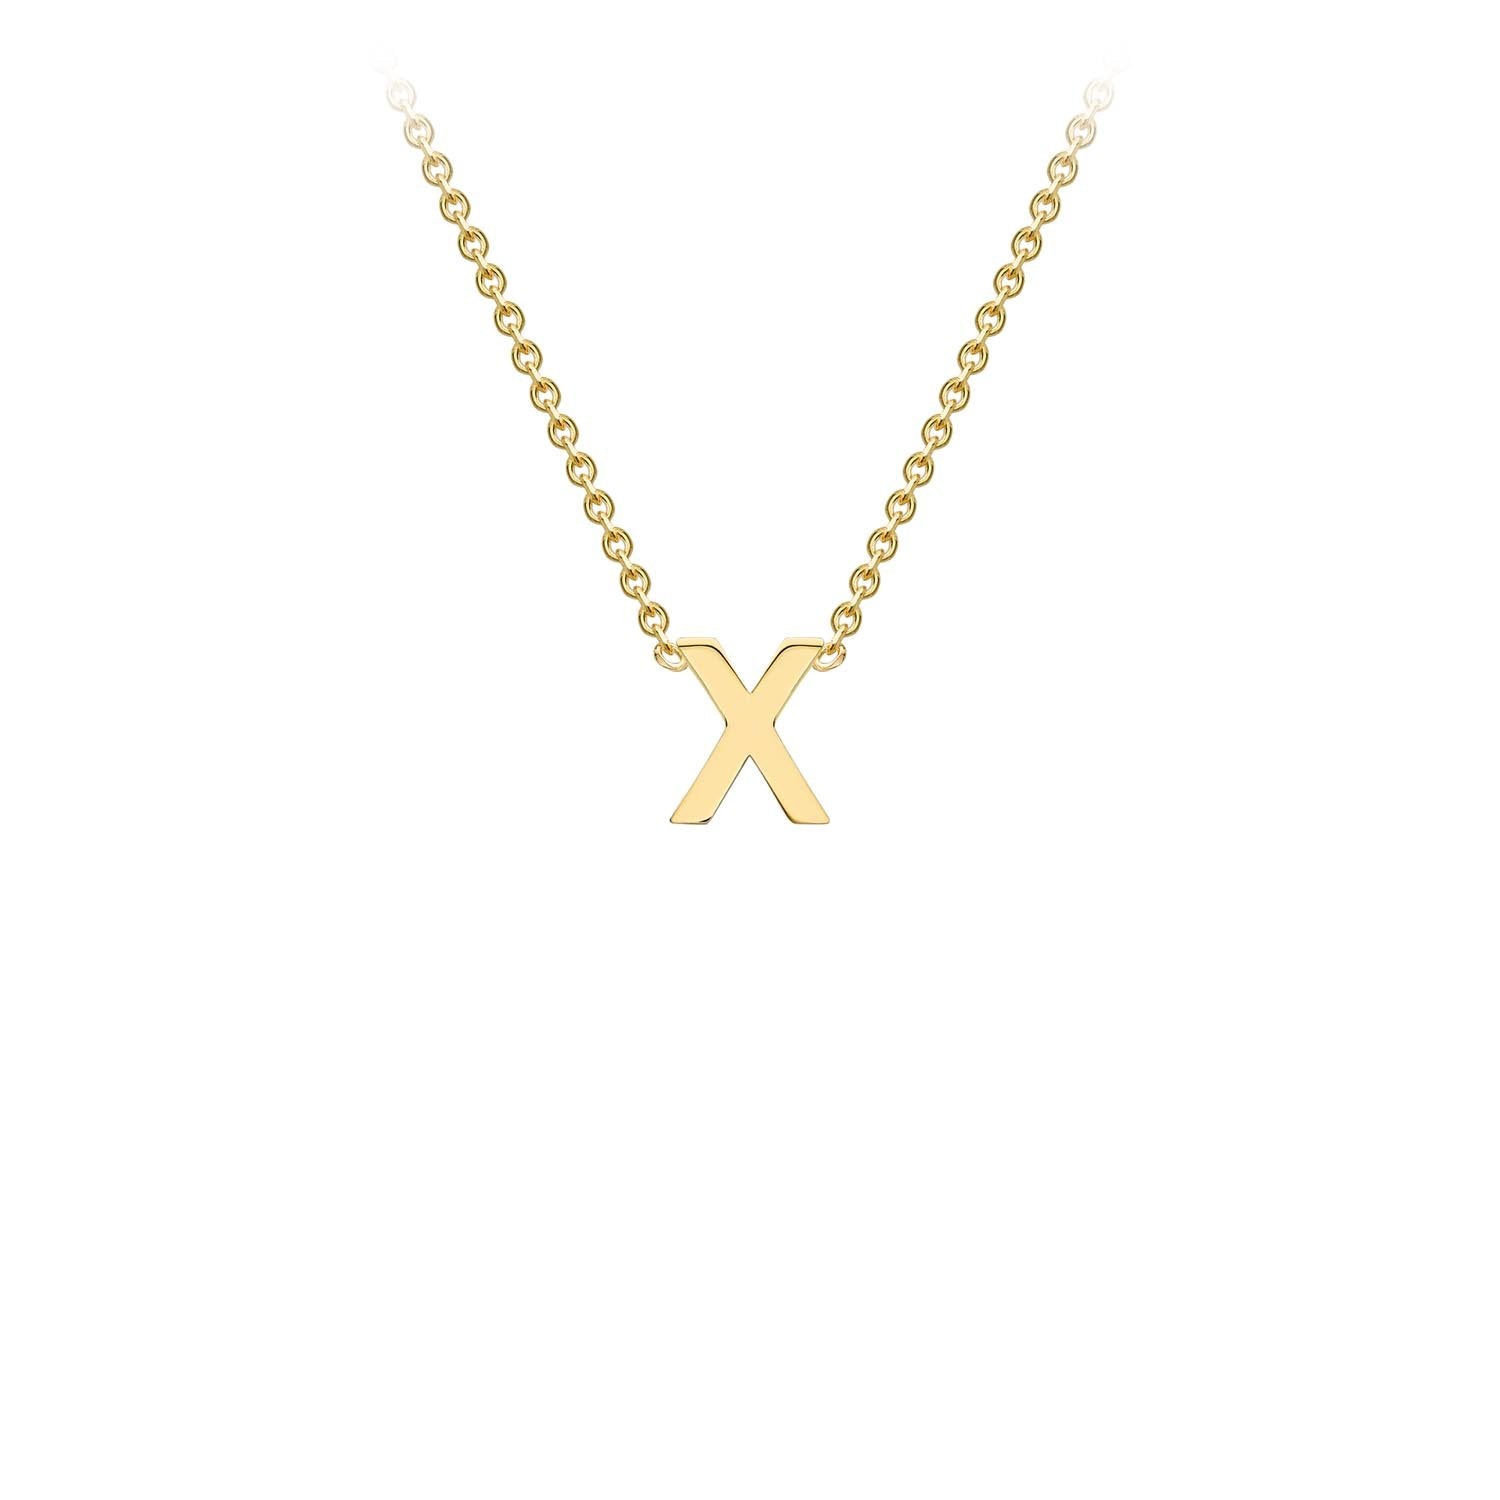 9ct Yellow Gold 'X' Petite Initial Adjustable Letter Necklace 38/43cm